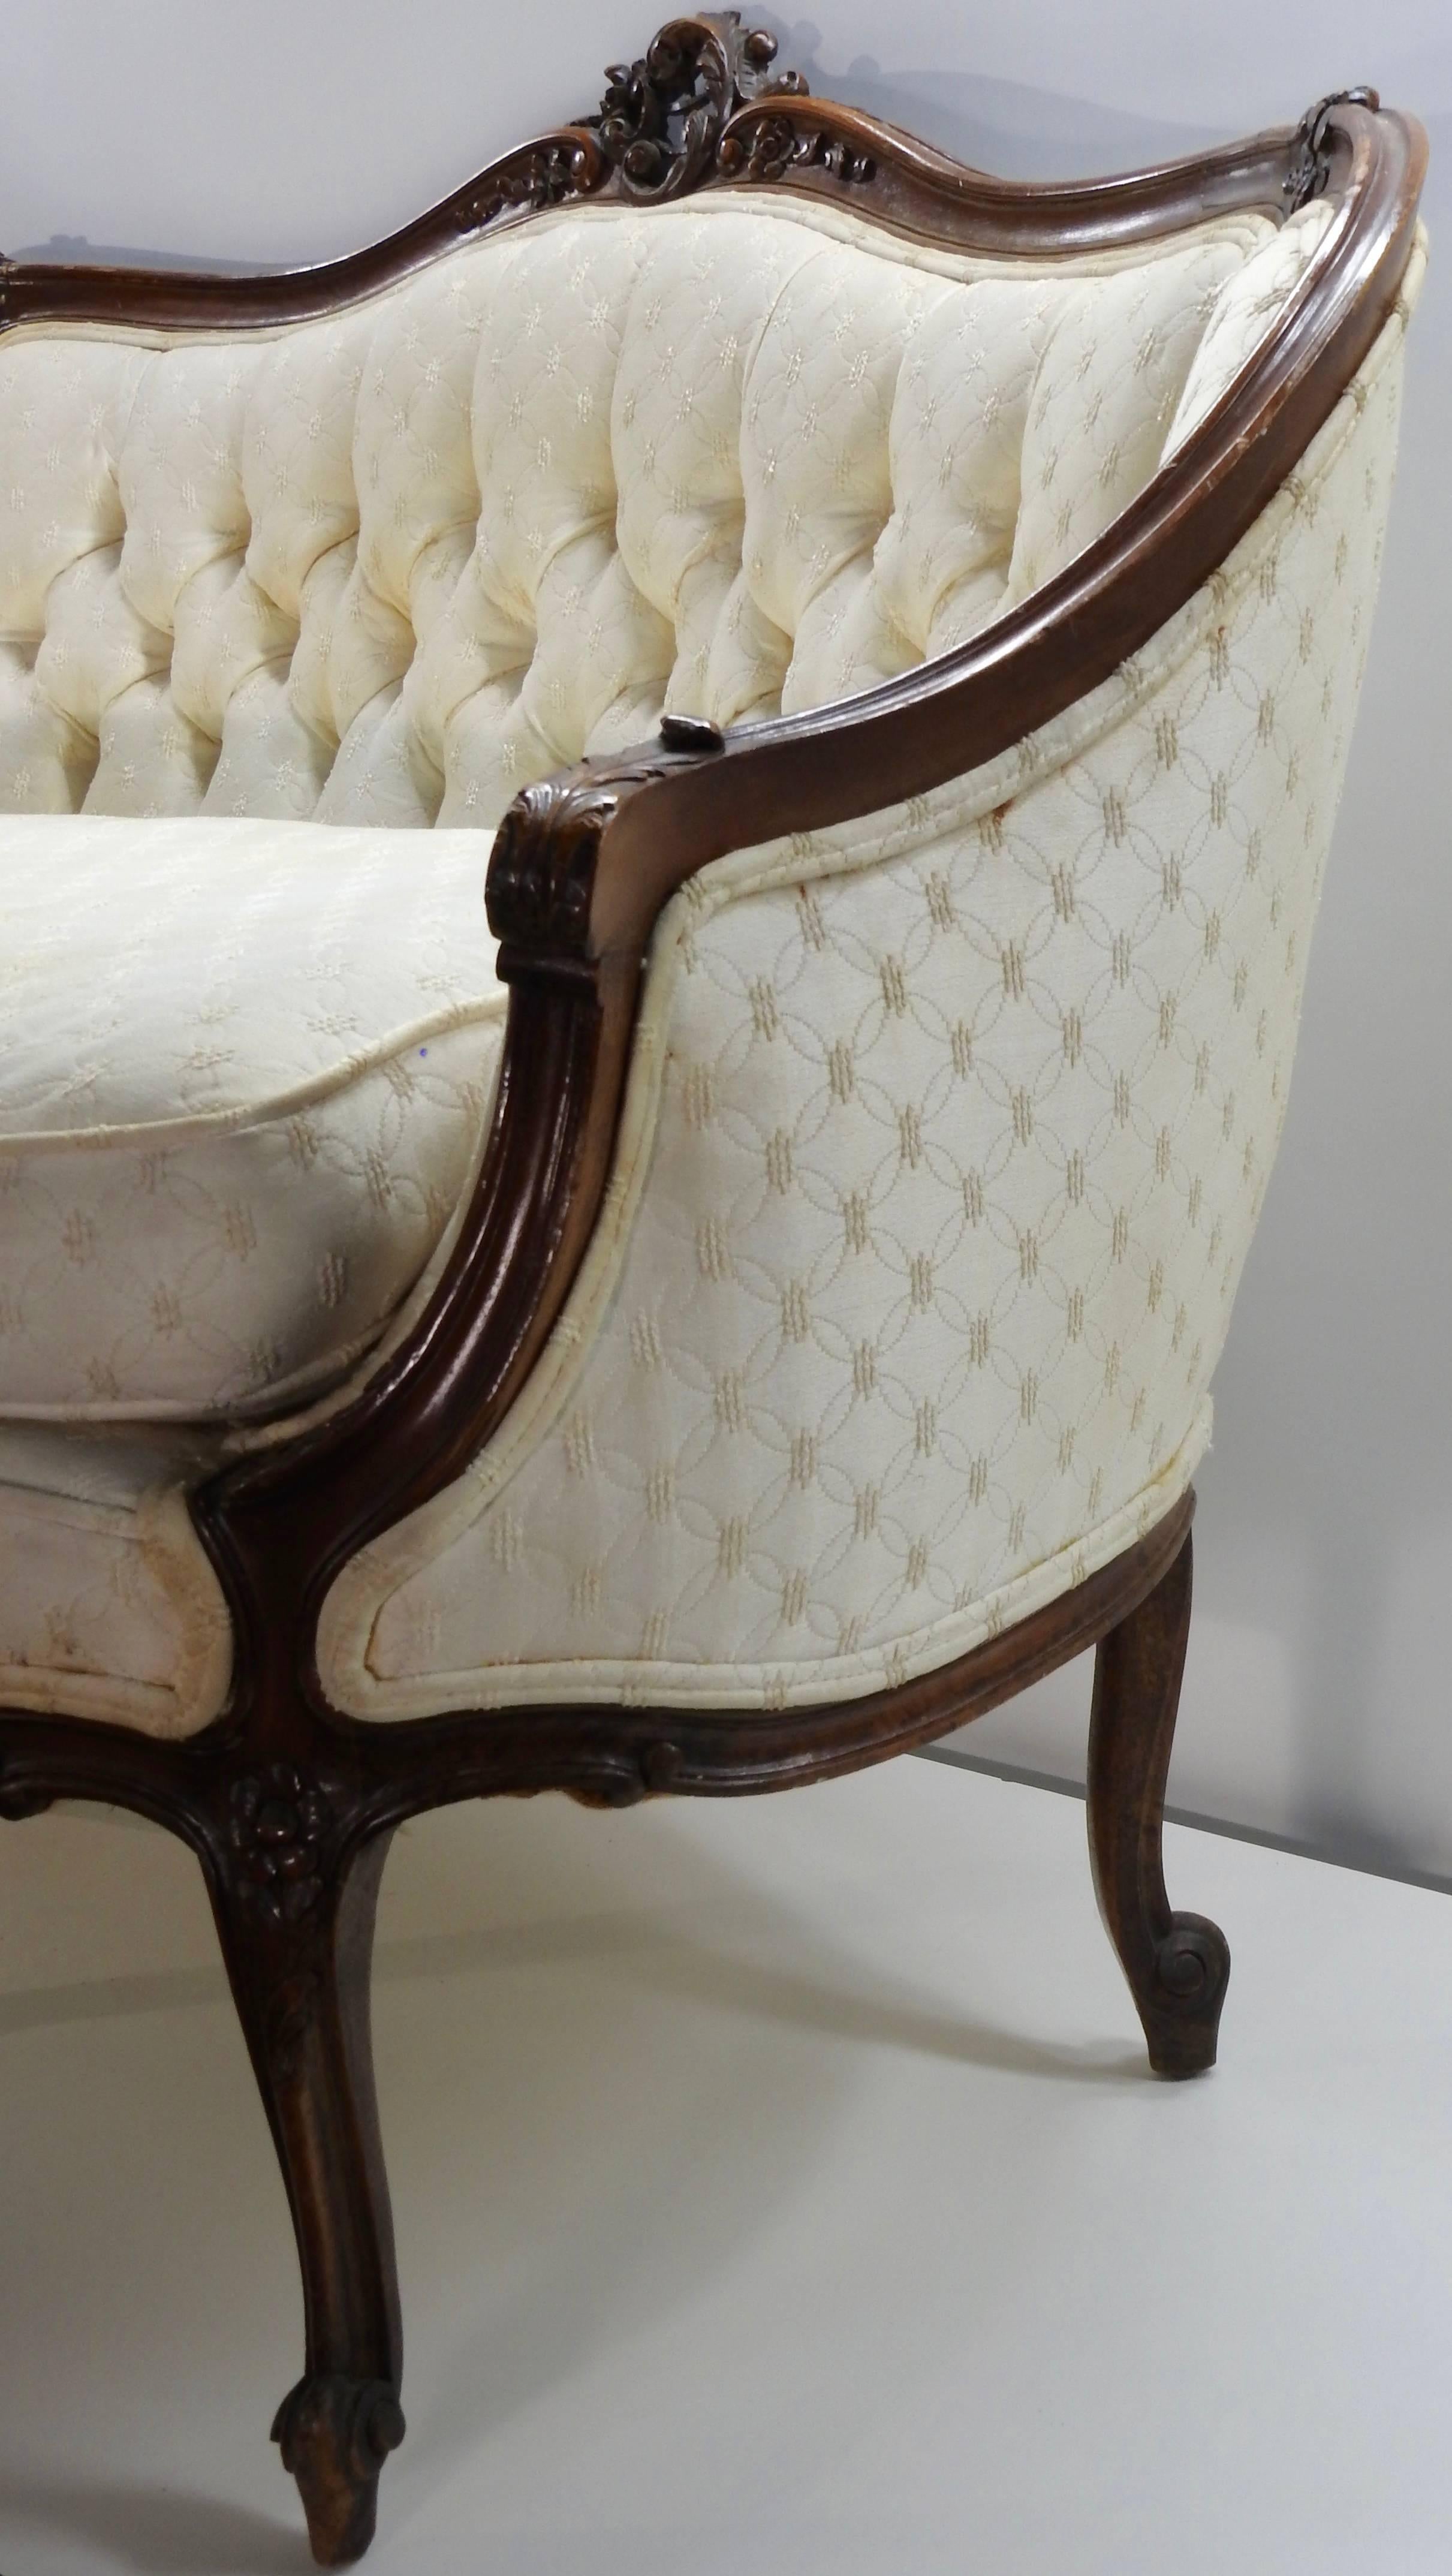 Victorian French Settee, 19th Century In Fair Condition For Sale In Cookeville, TN